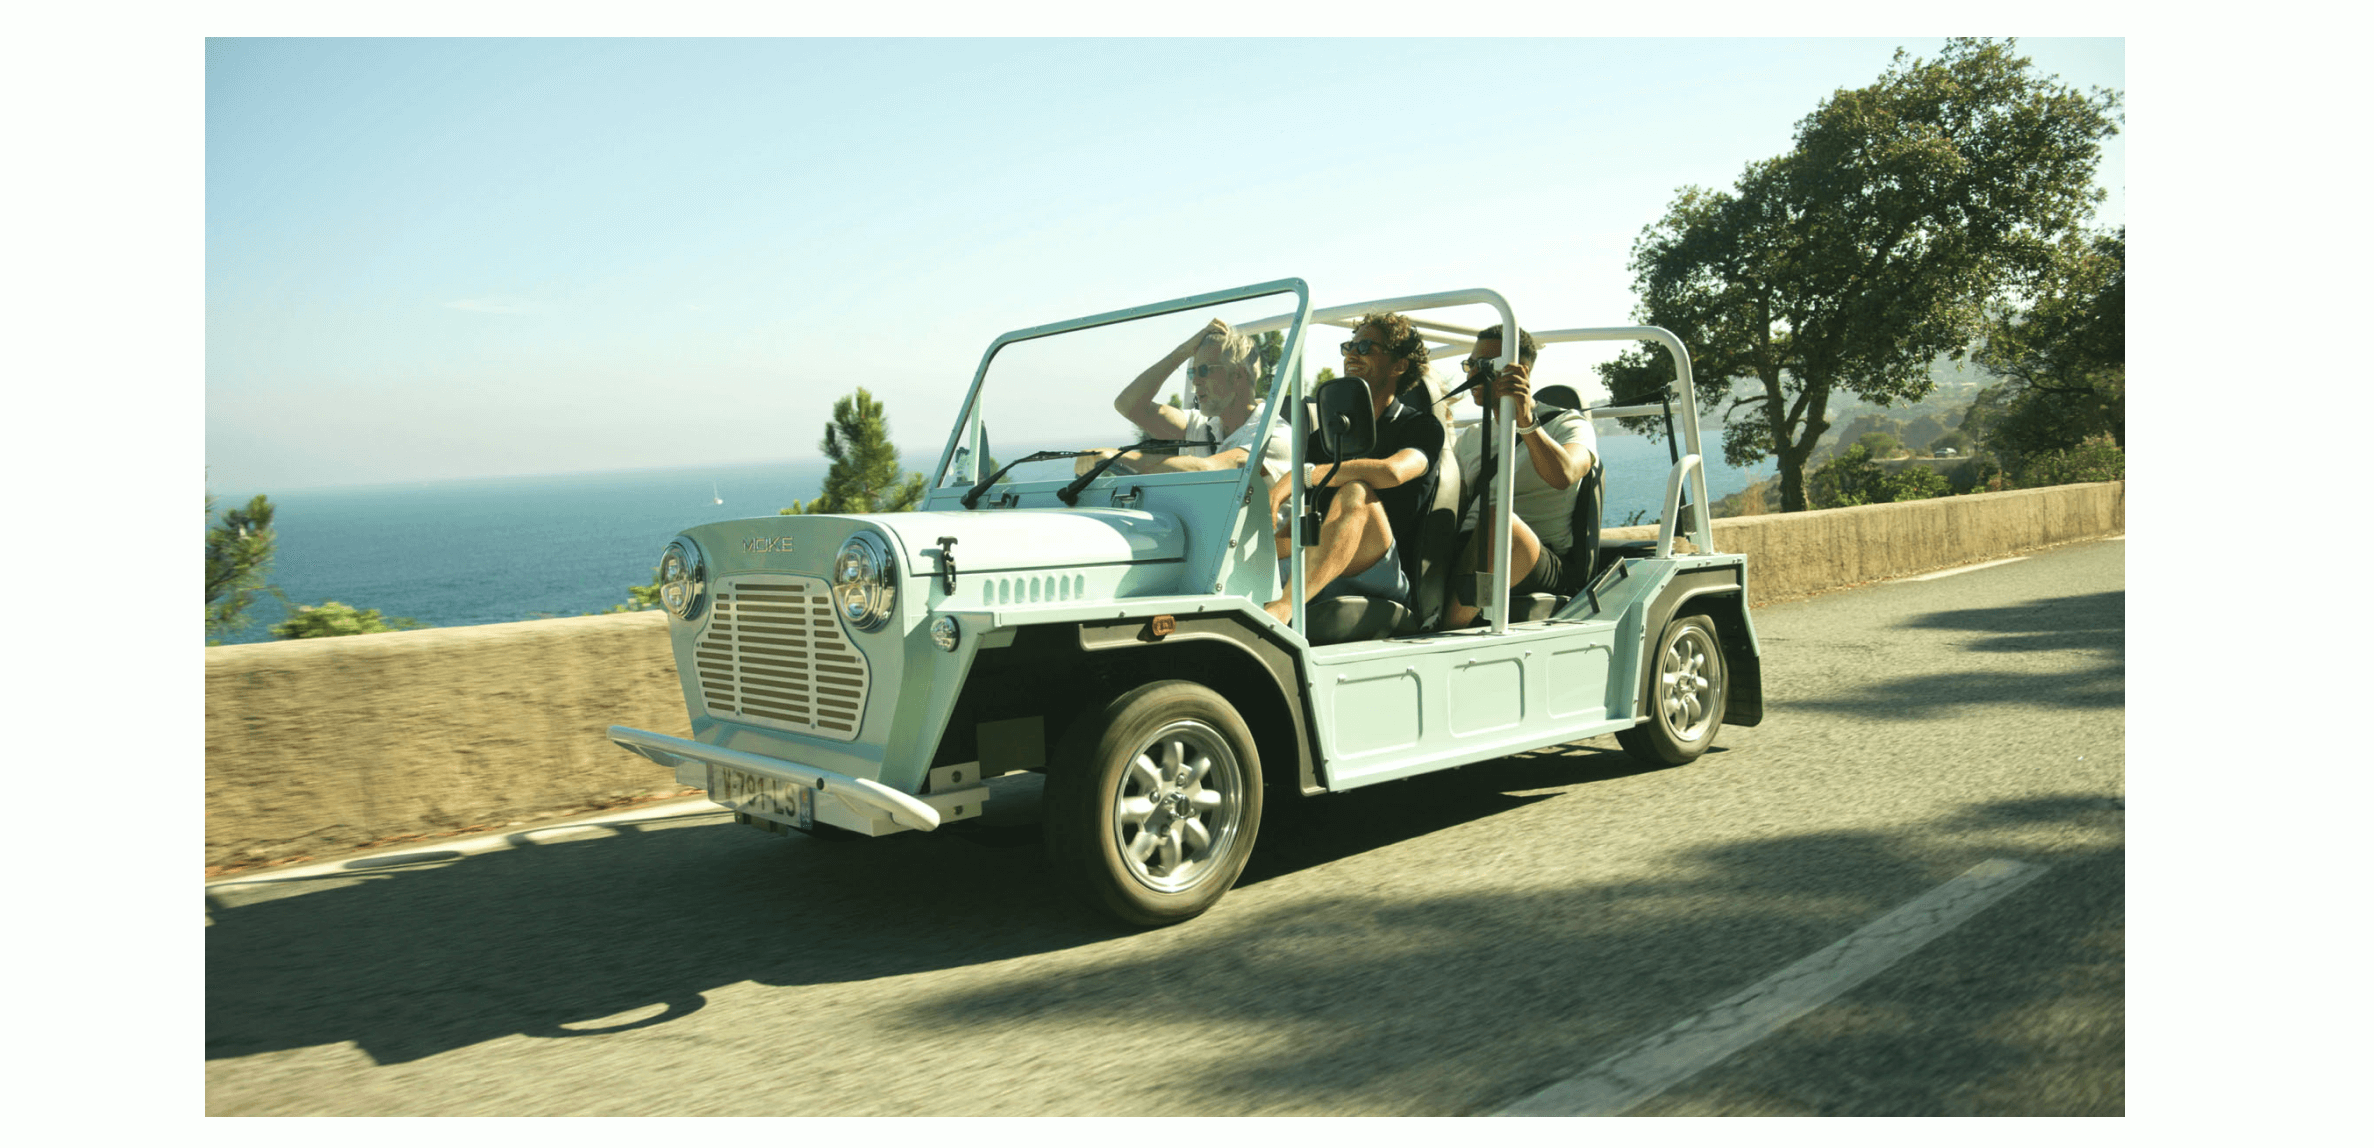 EV Technology Group will acquire up to 100 percent of MOKE International